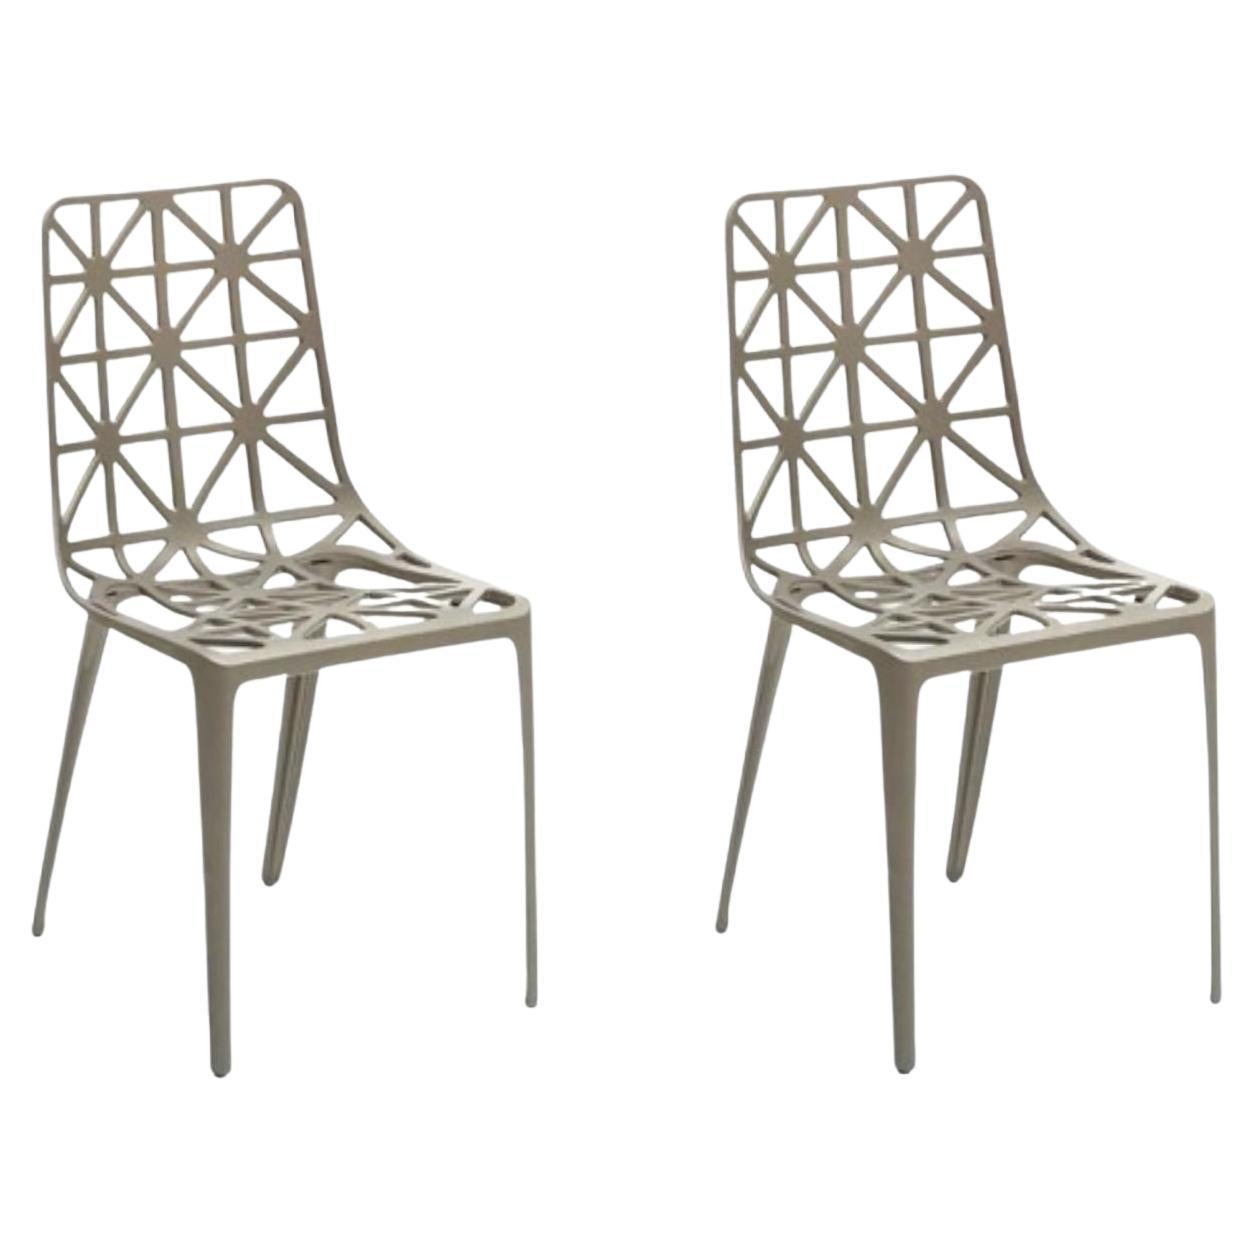 Set of 2 New Eiffel Tower Chairs by Alain Moatti For Sale